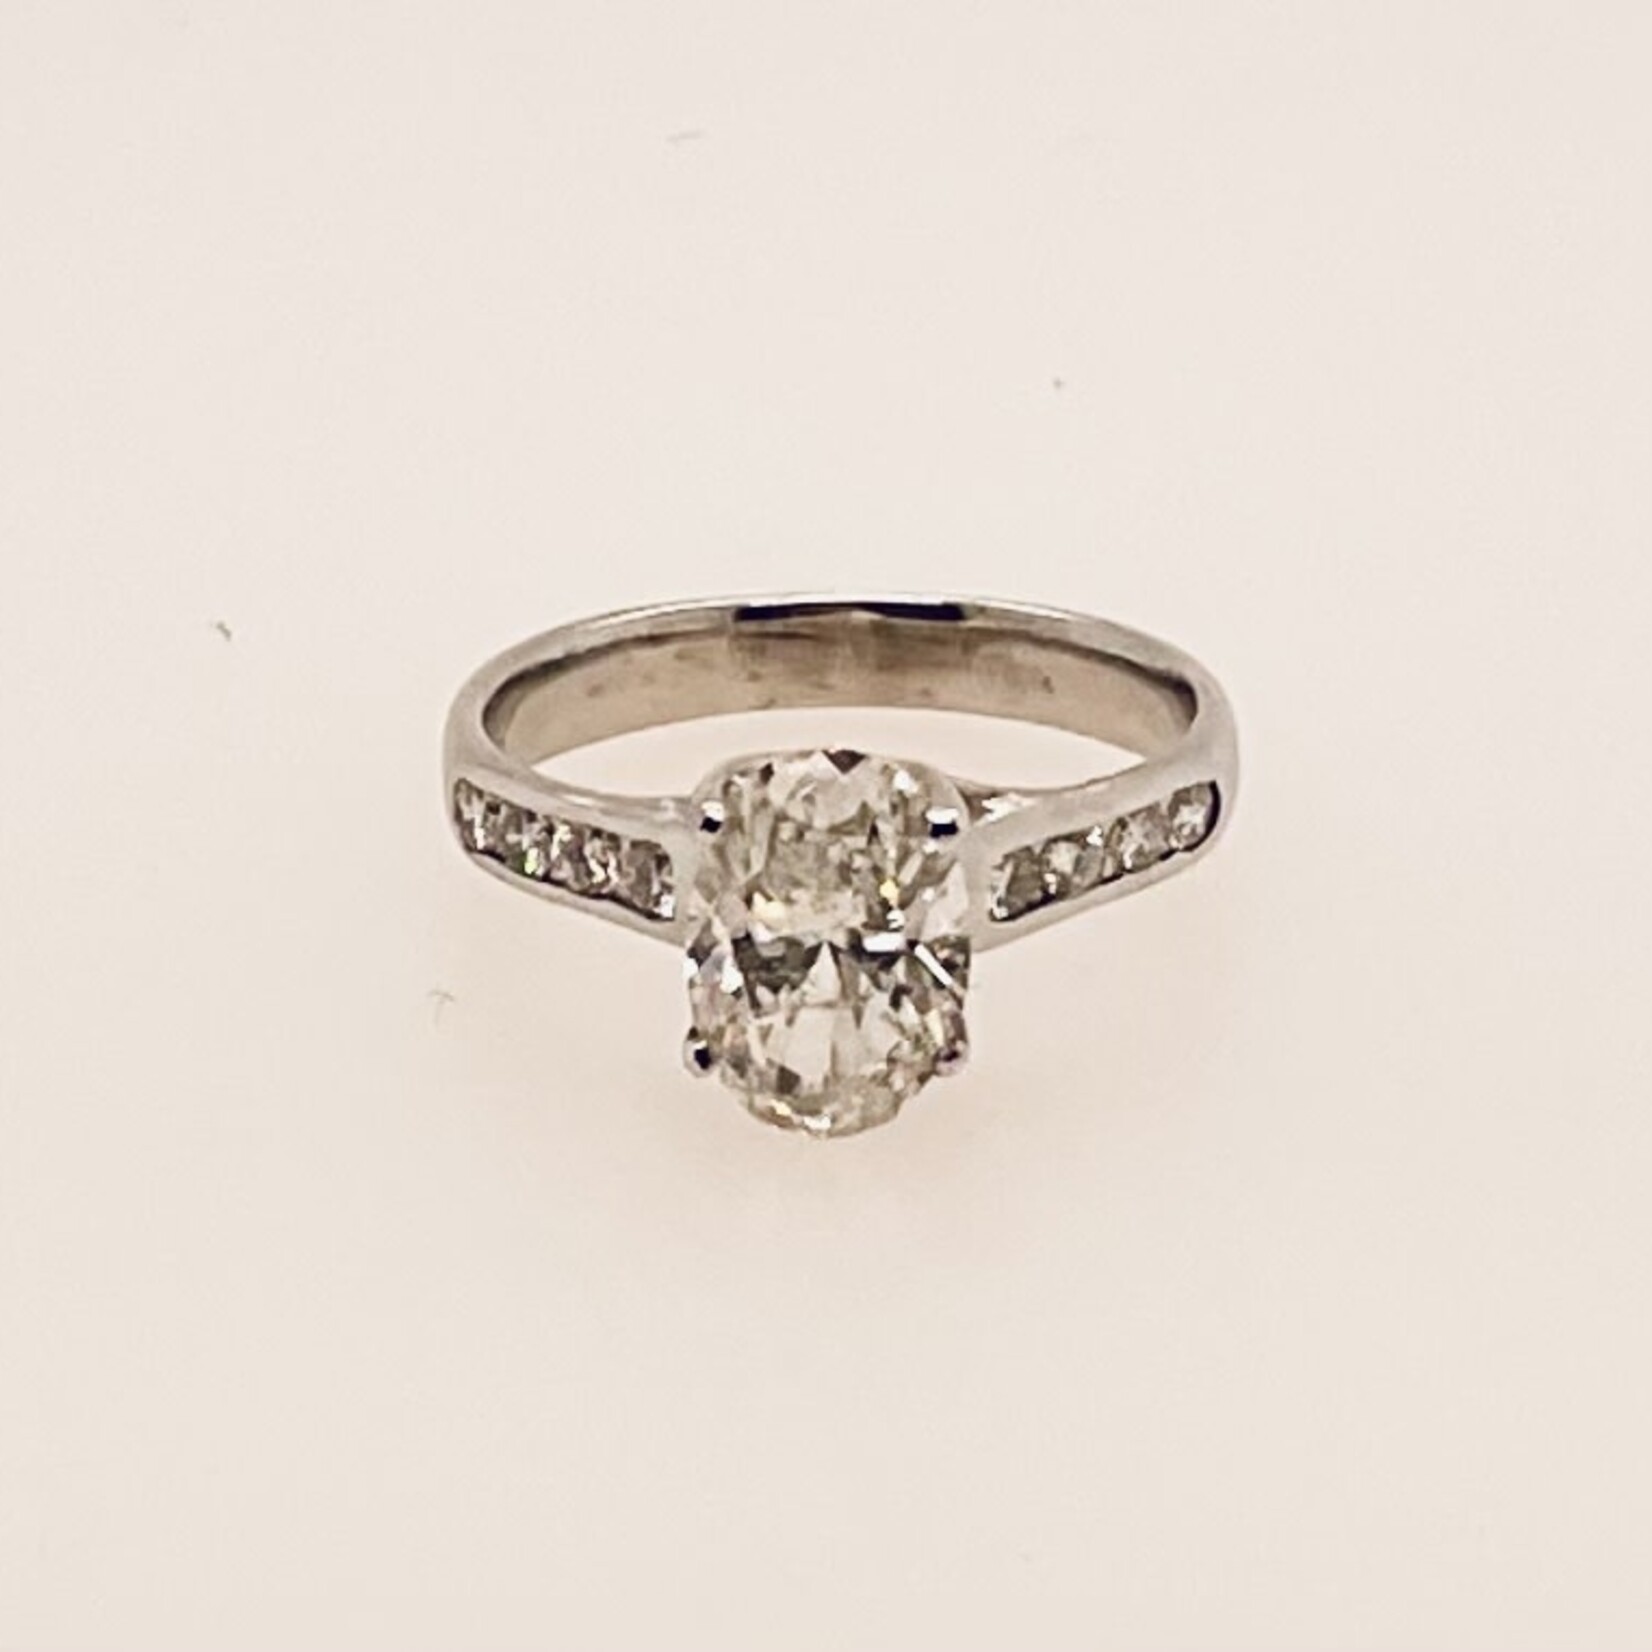 14Kt WG 1.94 Ctw 6 Engagement Ring Size 6 (MEMO)